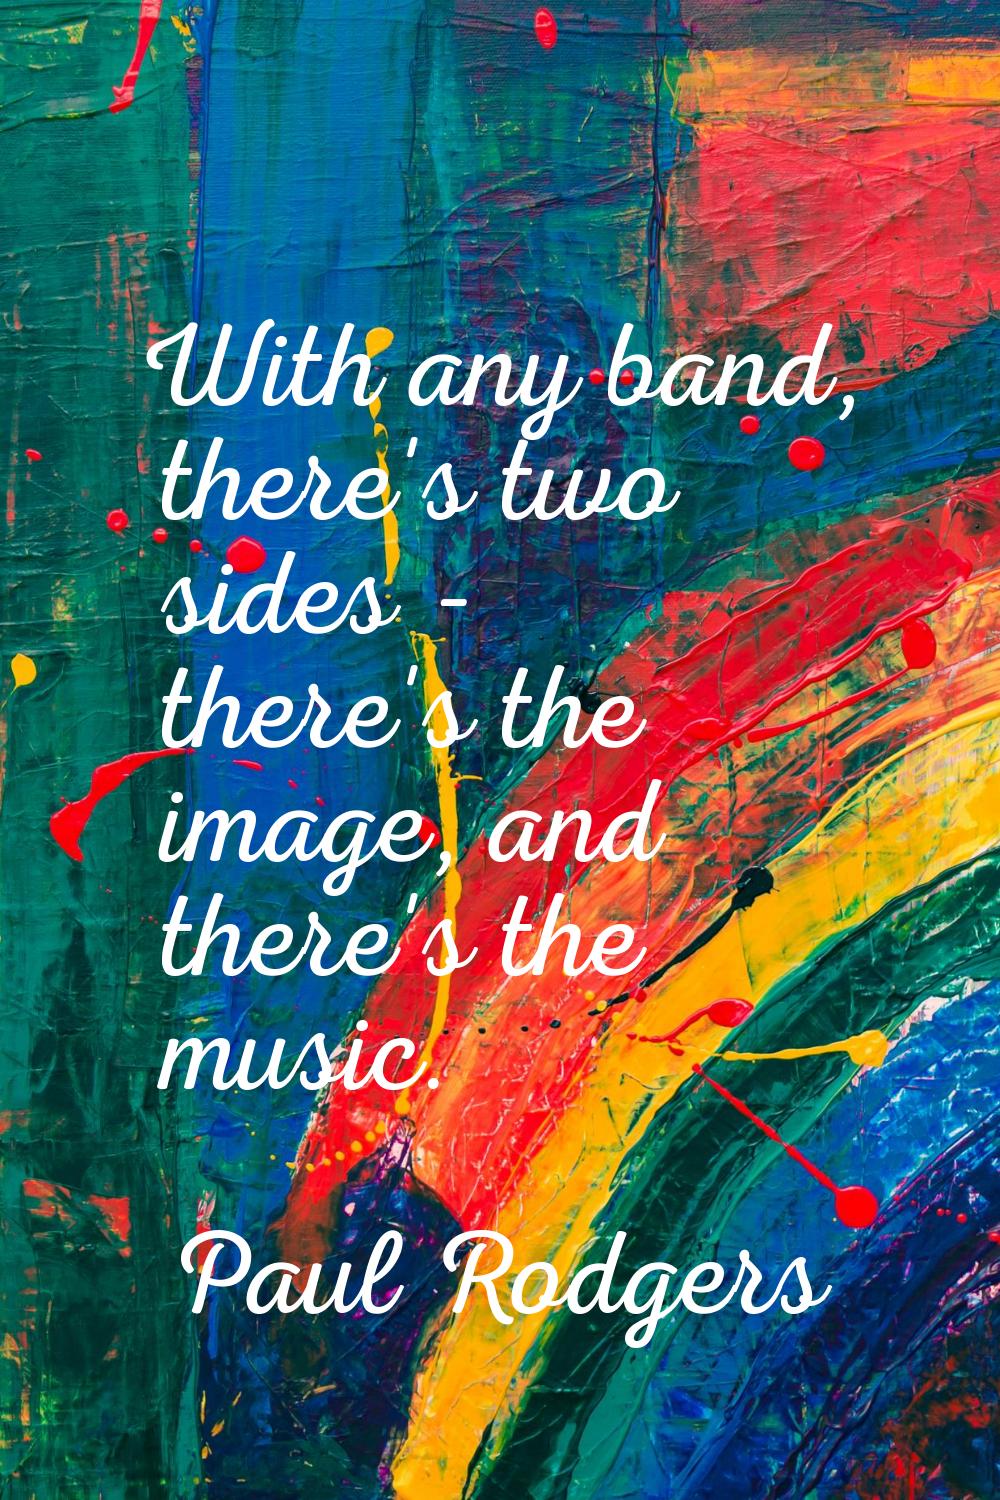 With any band, there's two sides - there's the image, and there's the music.